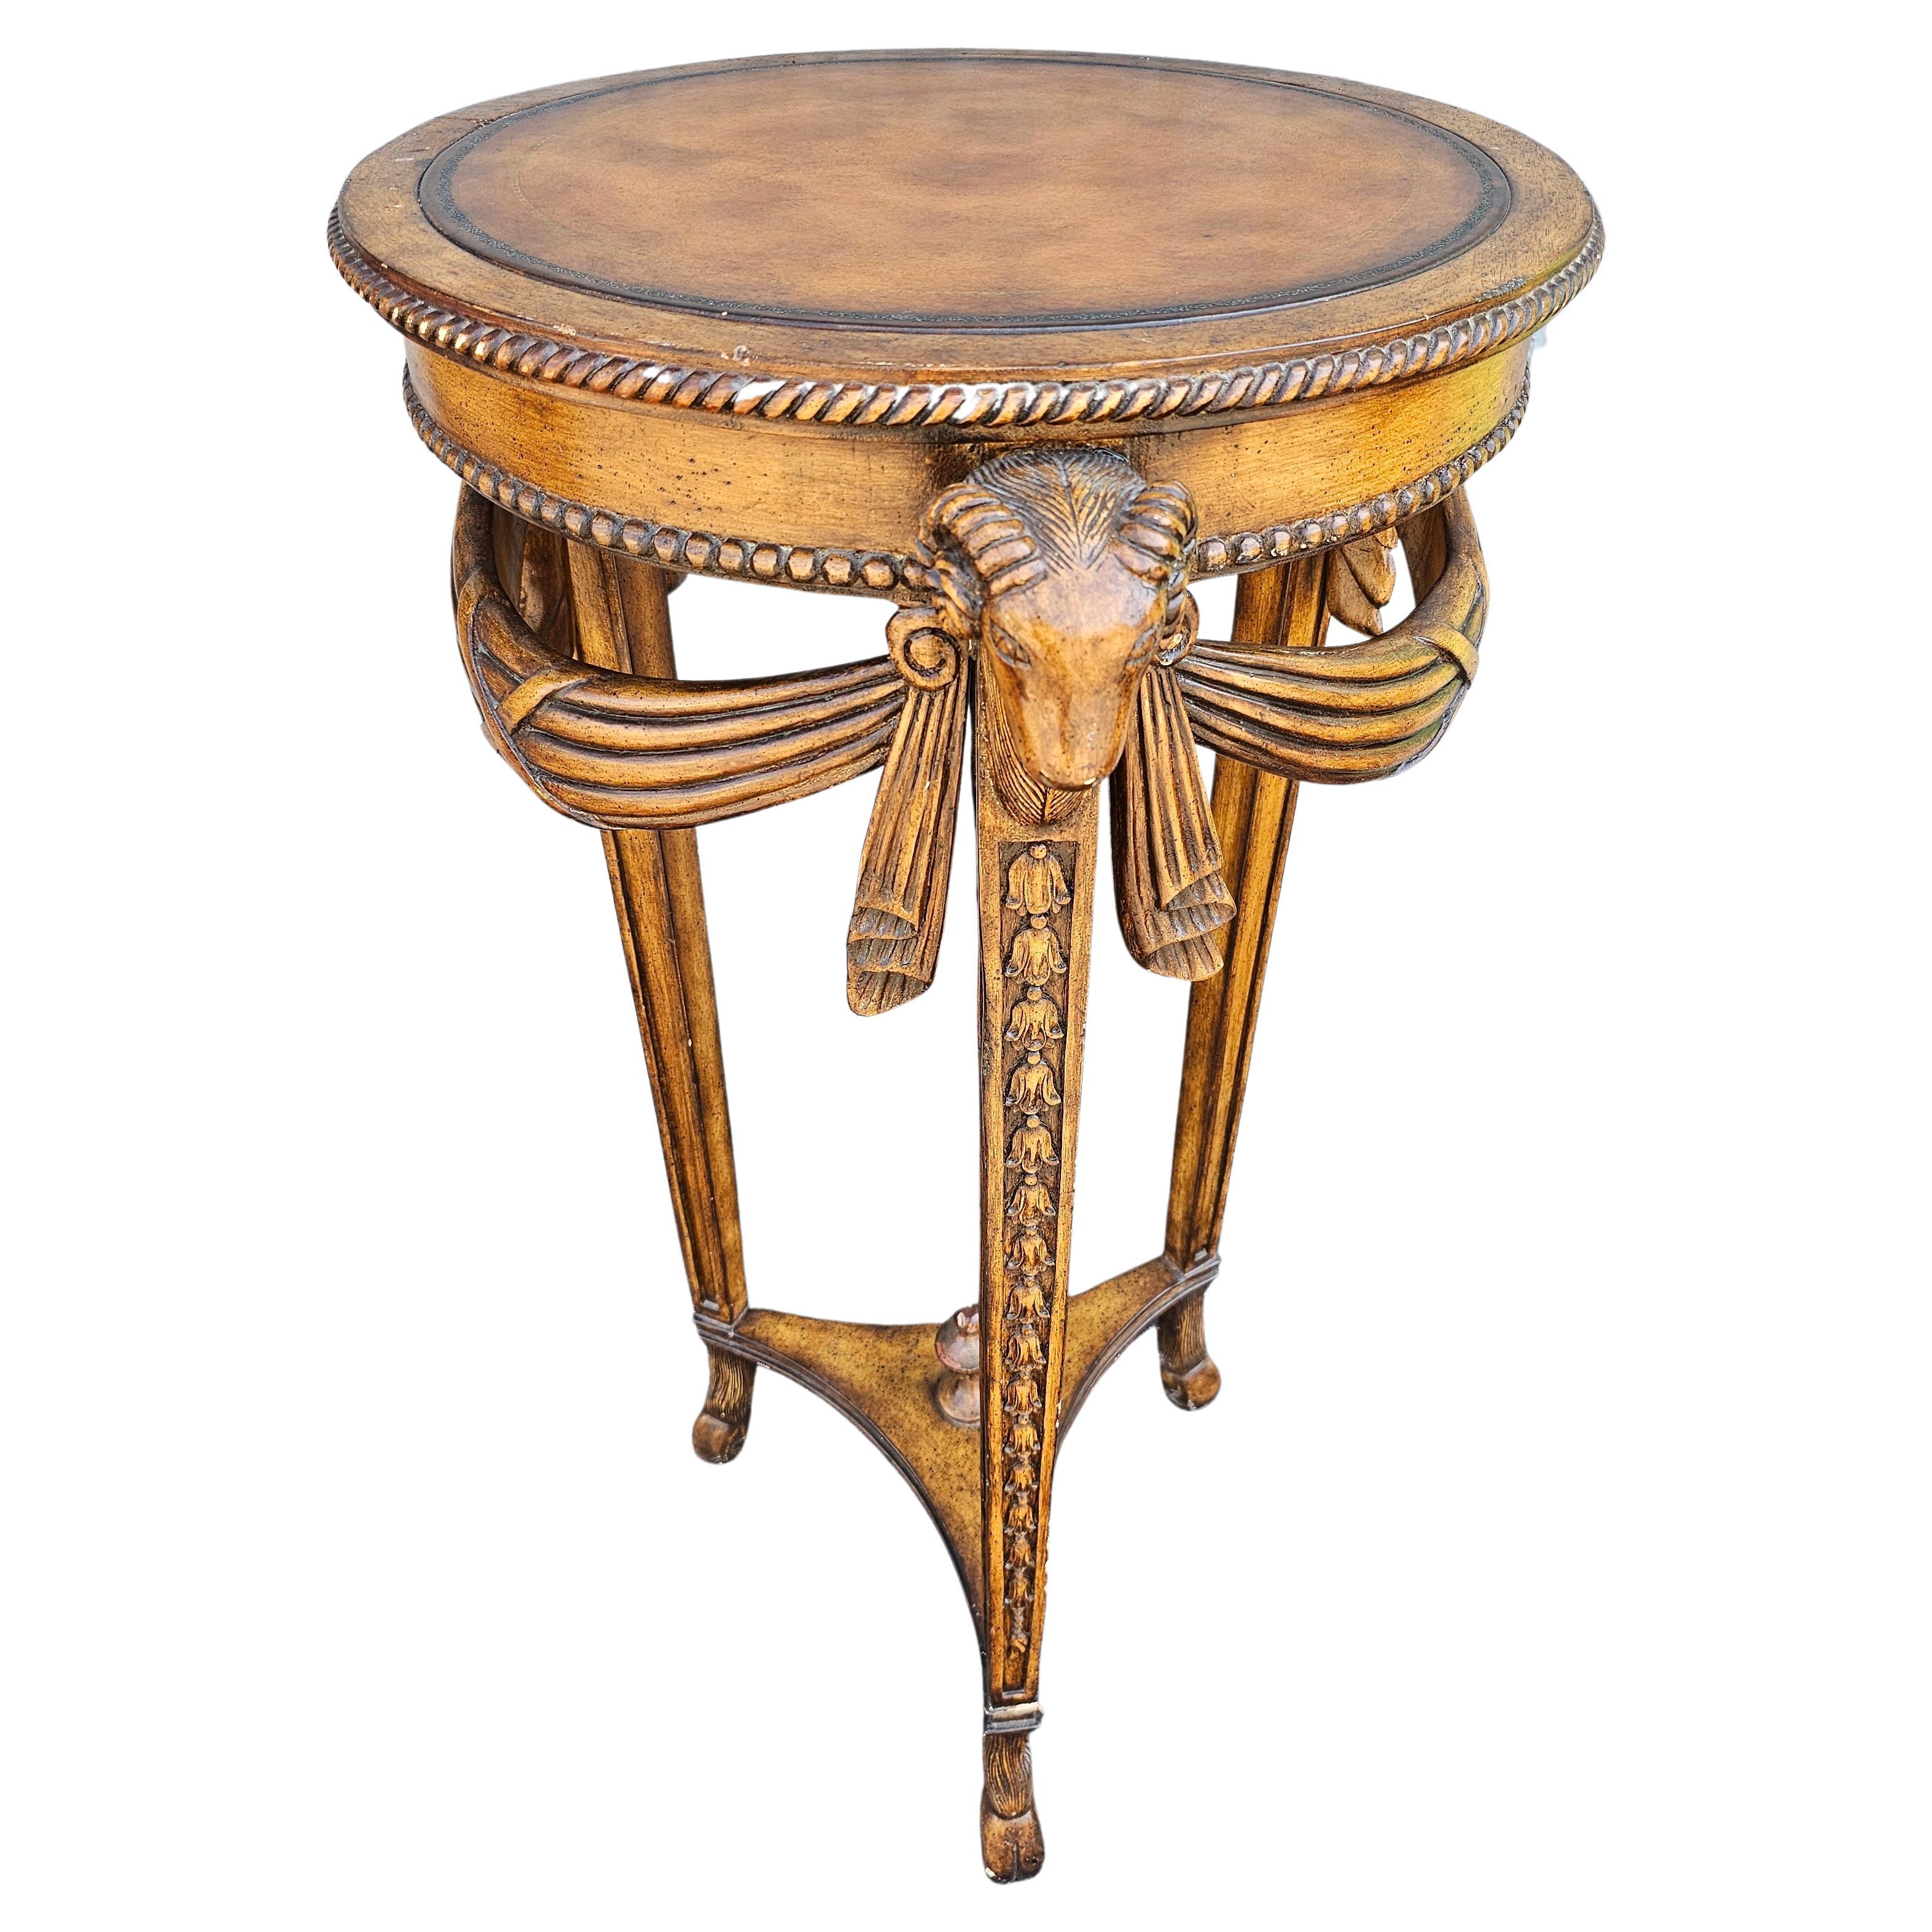 20th C. Neoclassical Style Fruitwood Rams Head Leather Top Pedestal Side Table For Sale